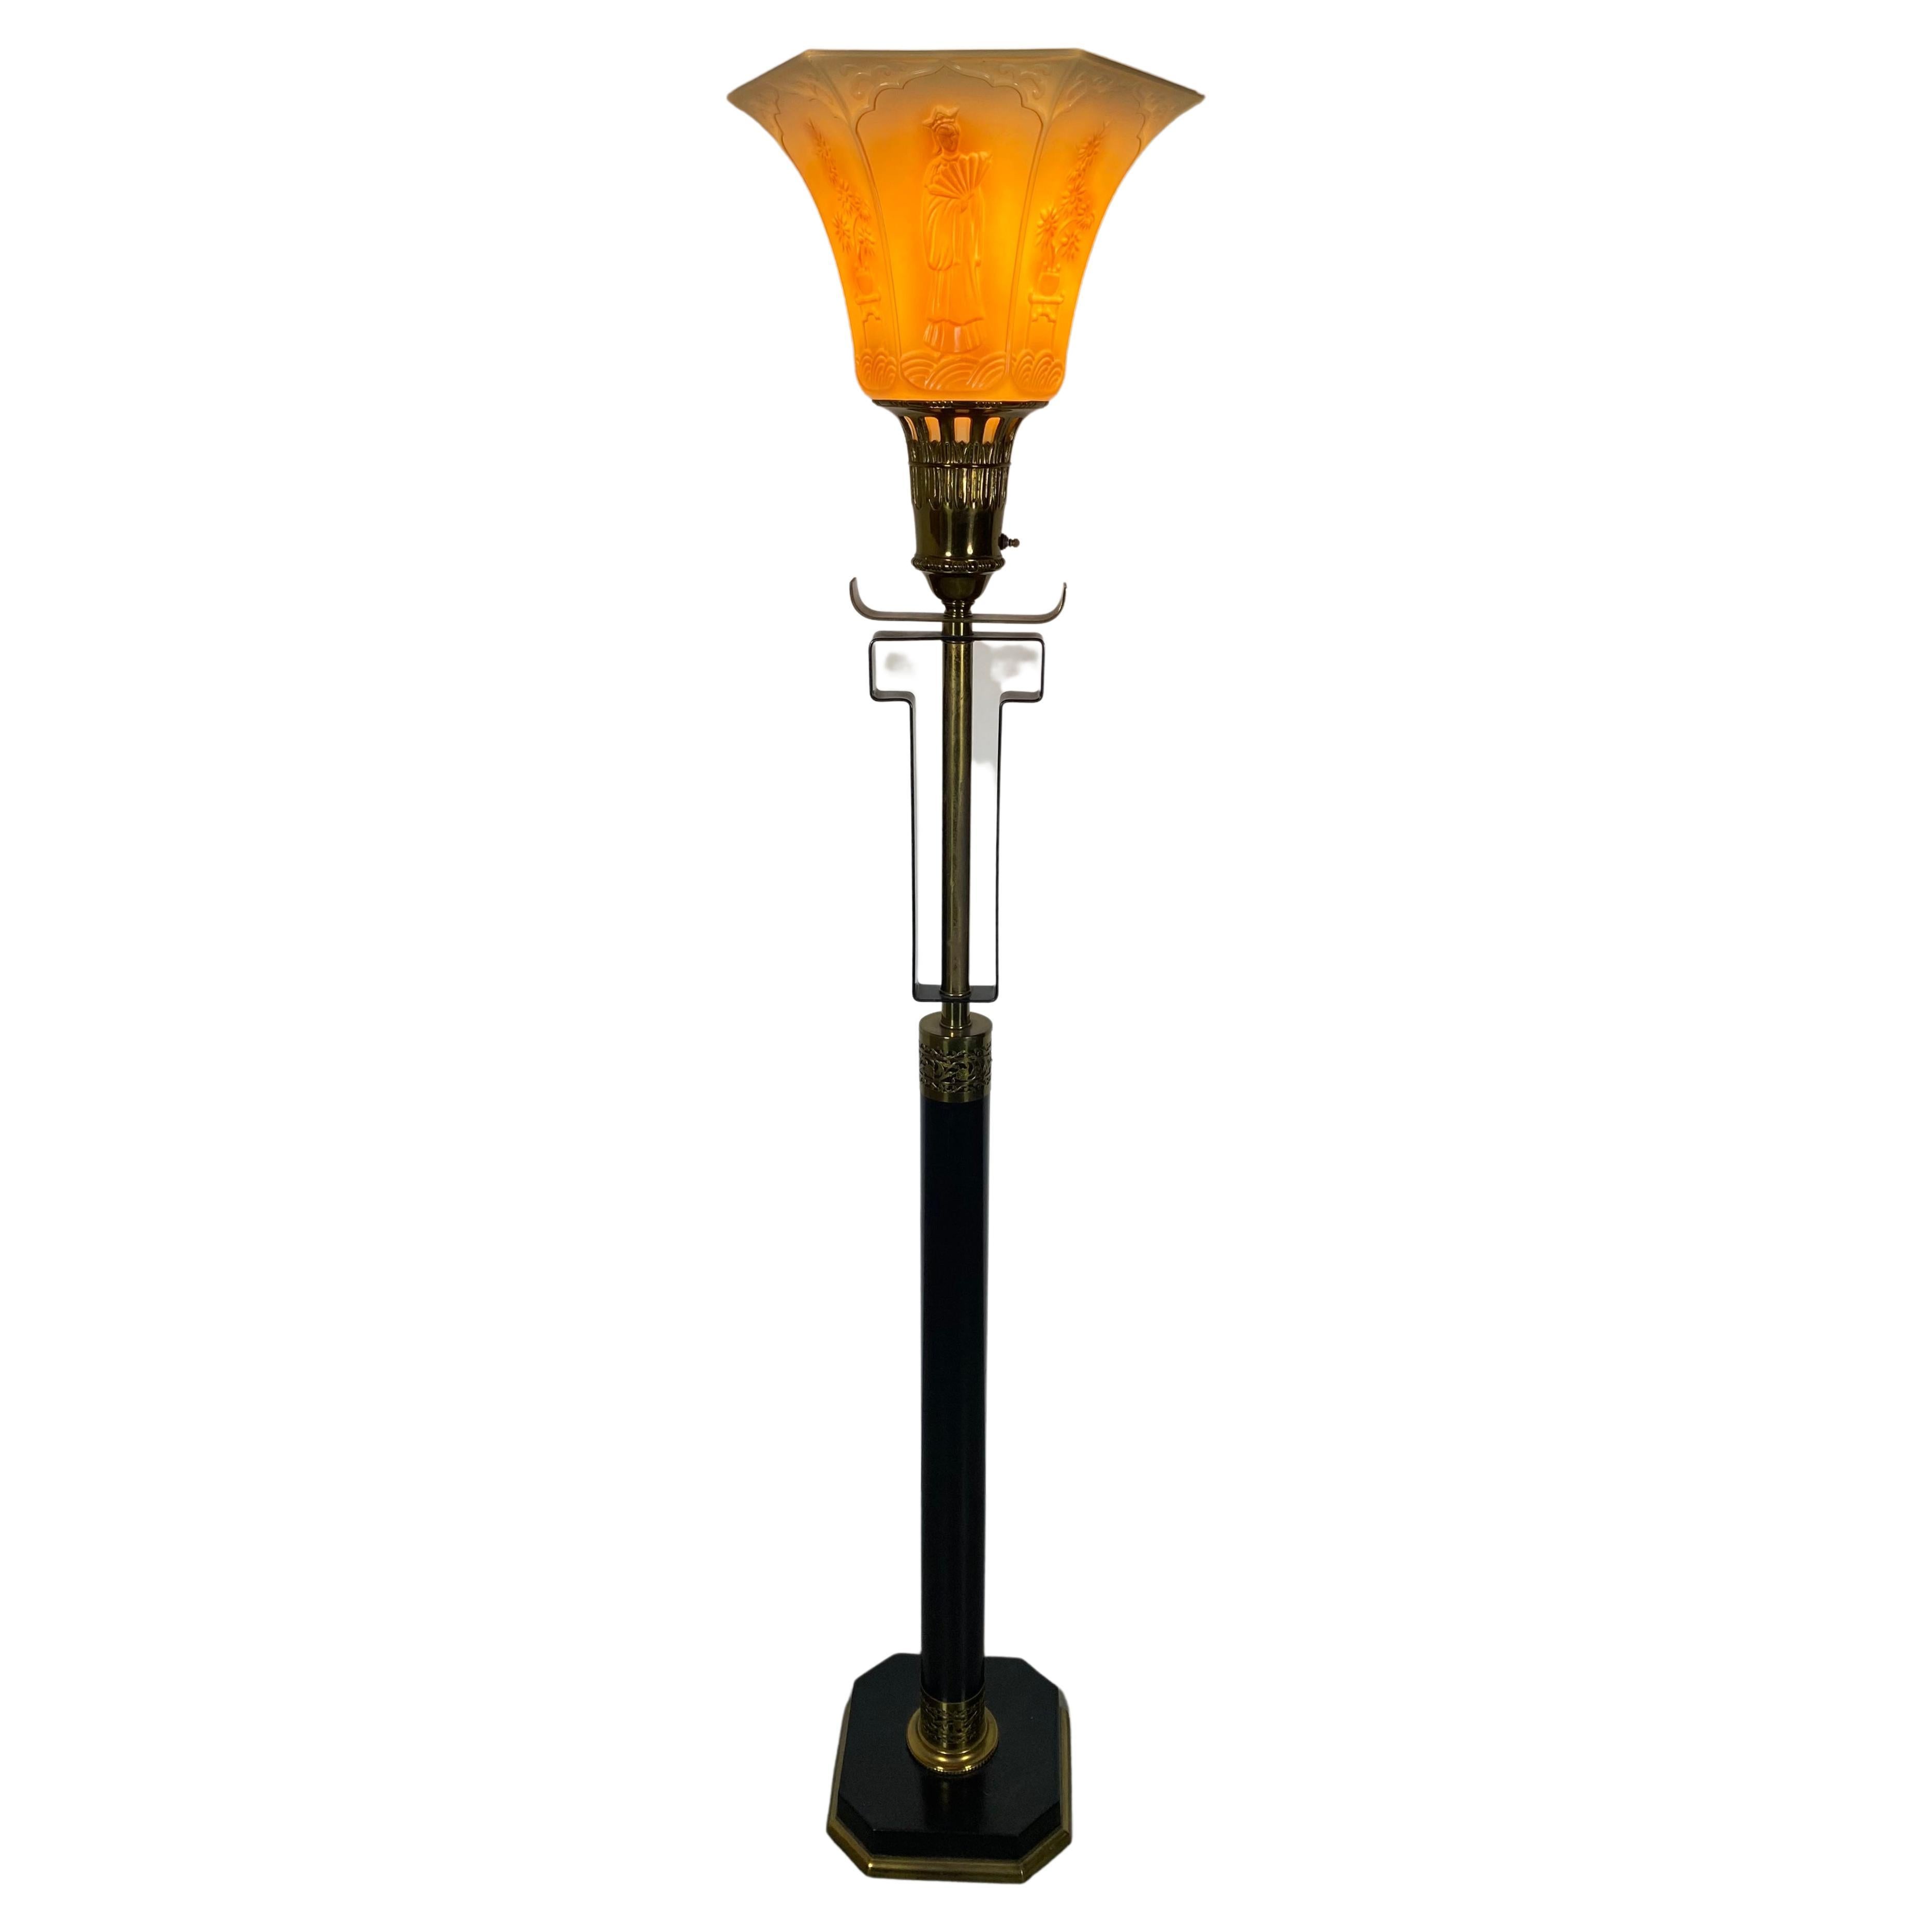 Asian Modernist Torchere / Floor Lamp, Attributed to James Mont, 1940s